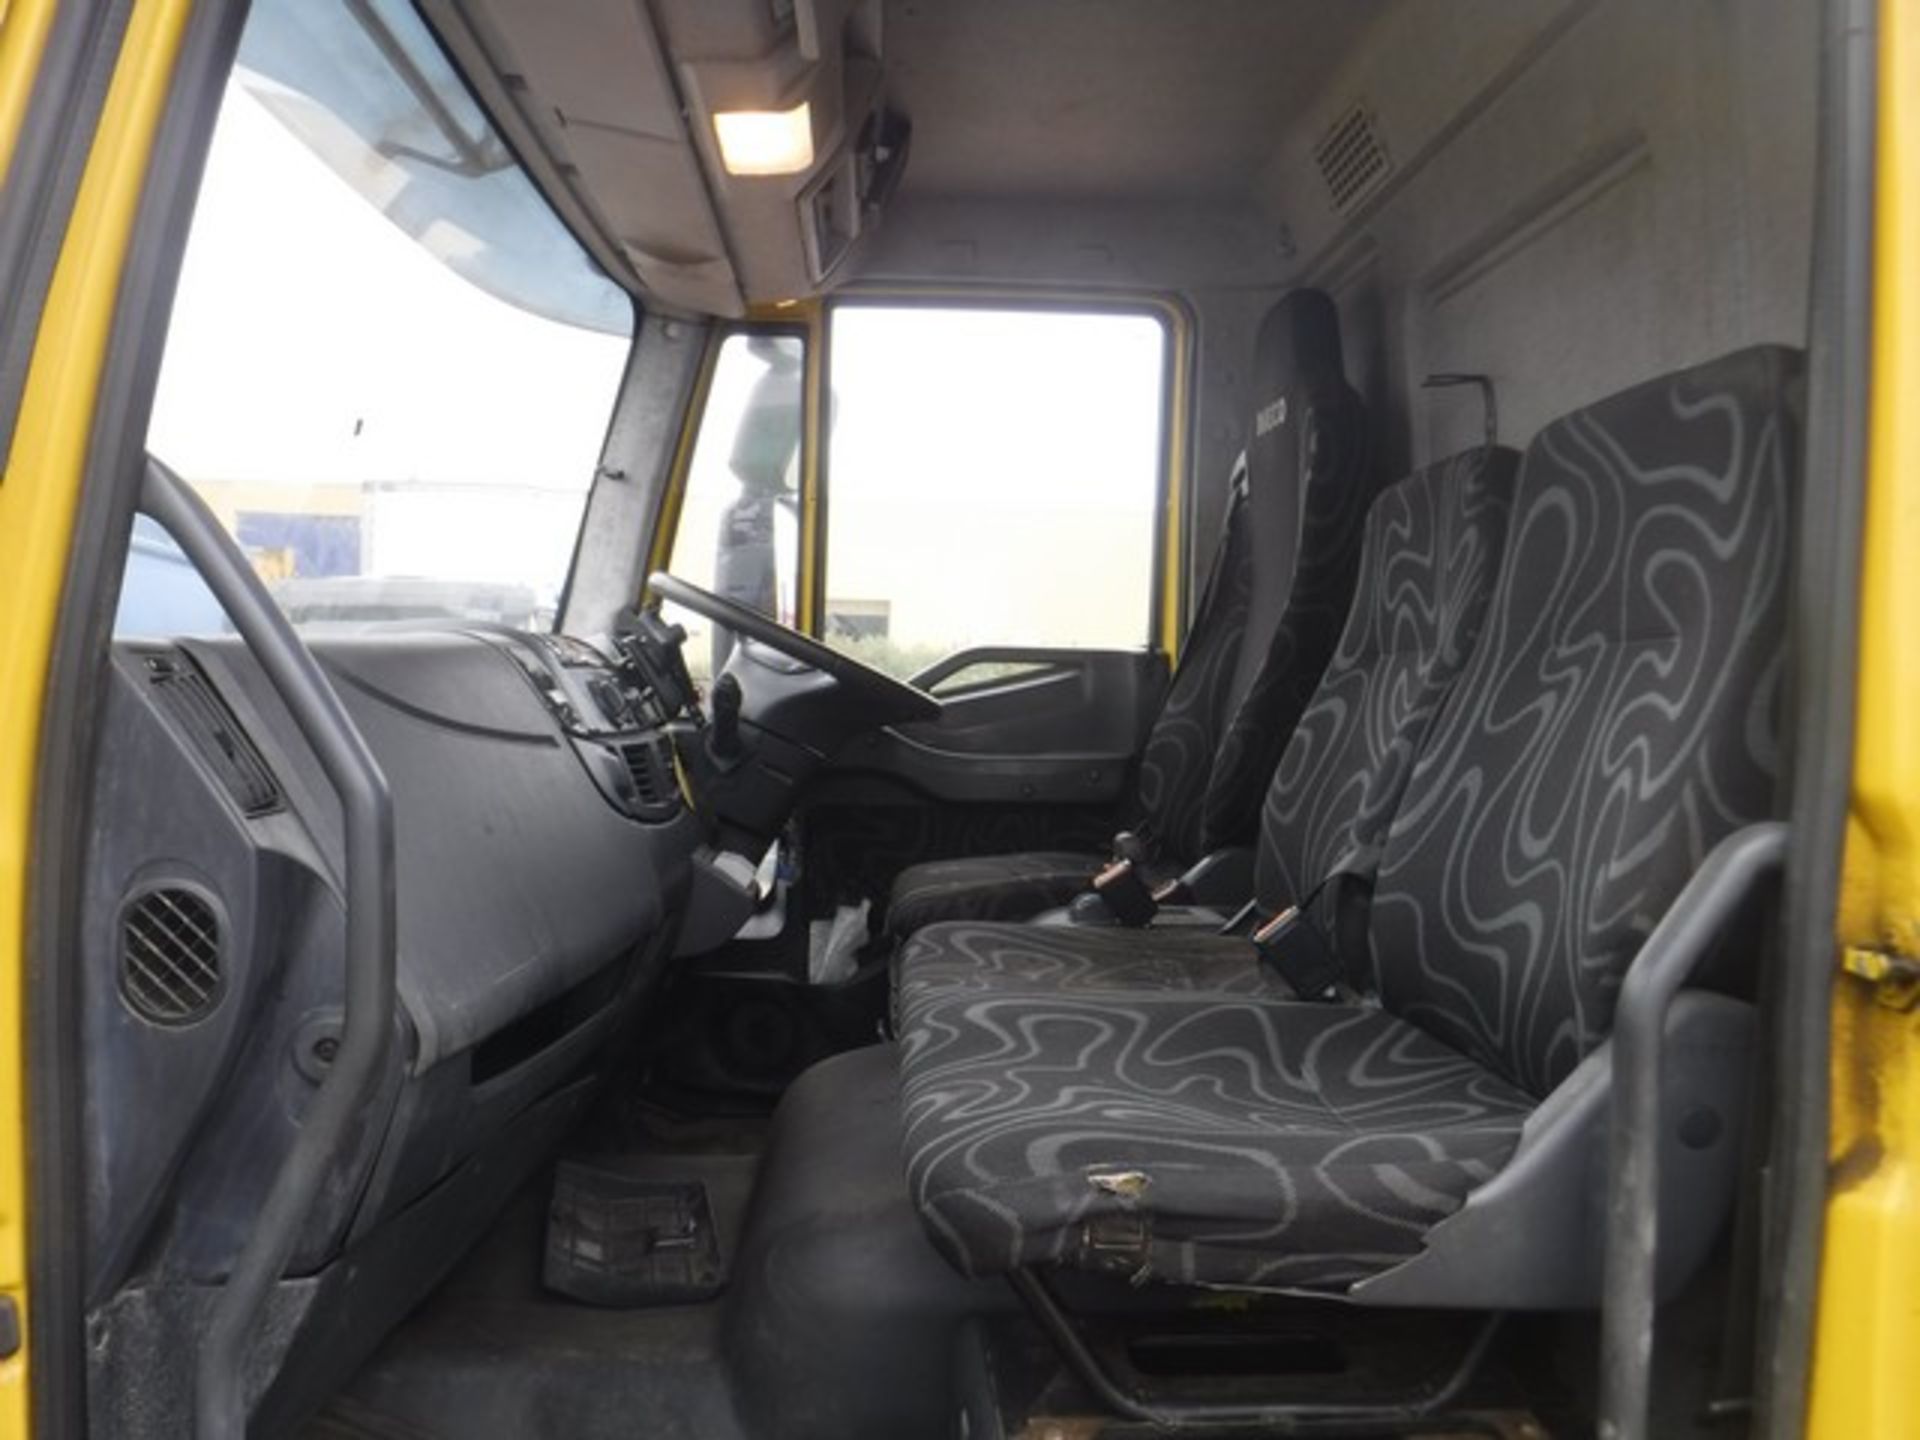 IVECO MODEL EUROCARGO (MY 2008) - 3920cc - Image 2 of 17